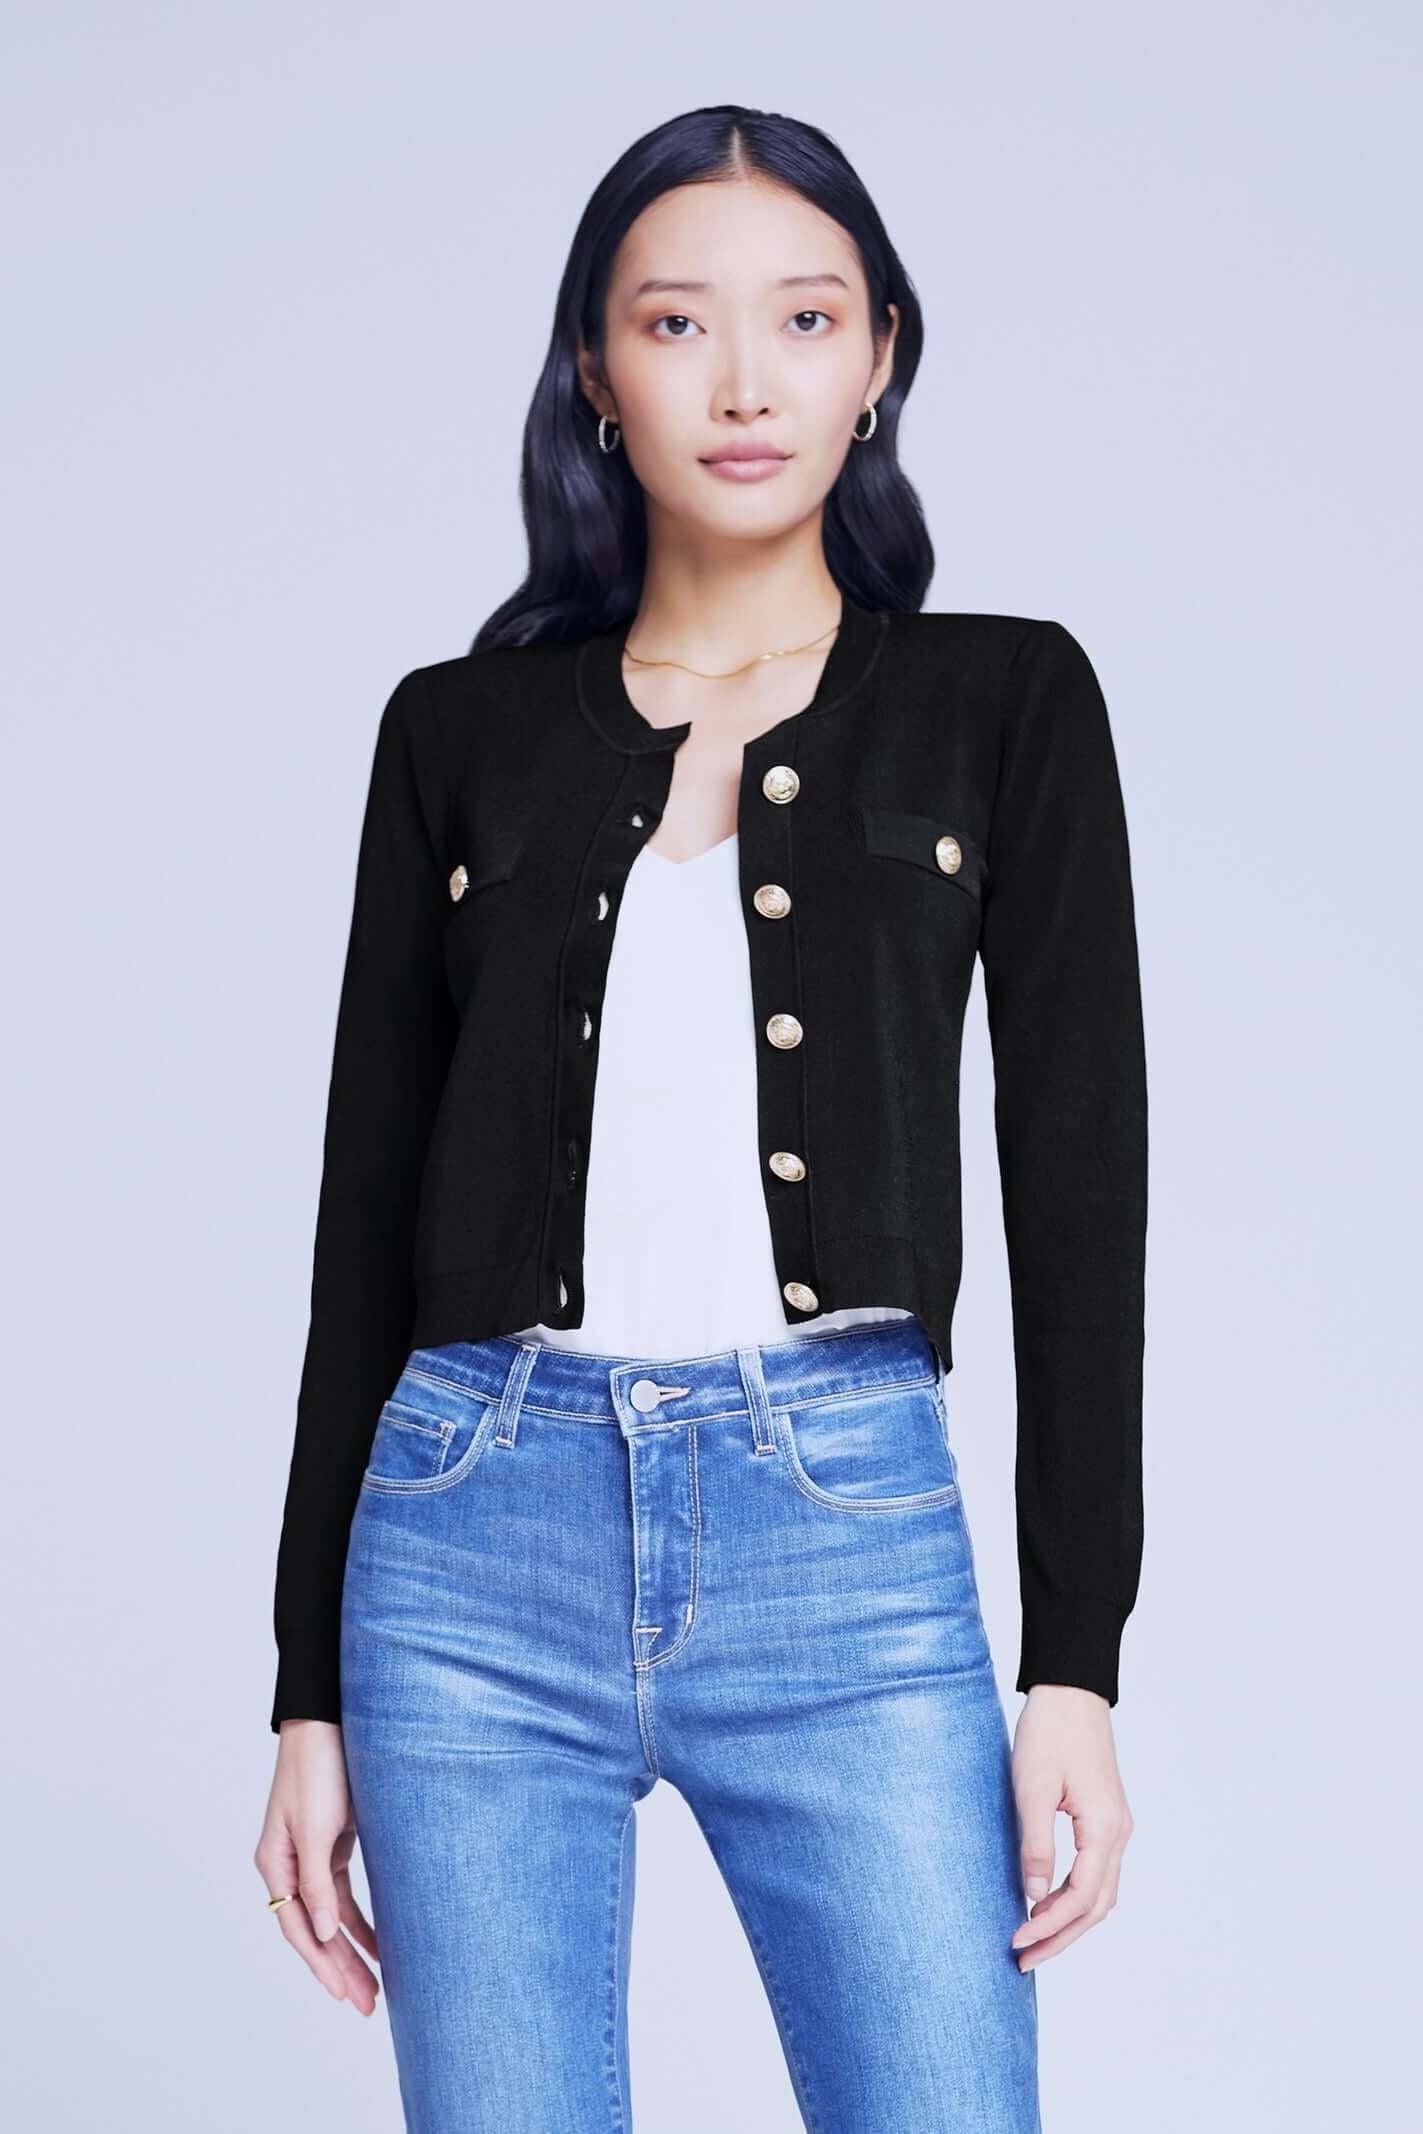 L'AGENCE TOULOUSE CROP CARDIGAN IN BLACK